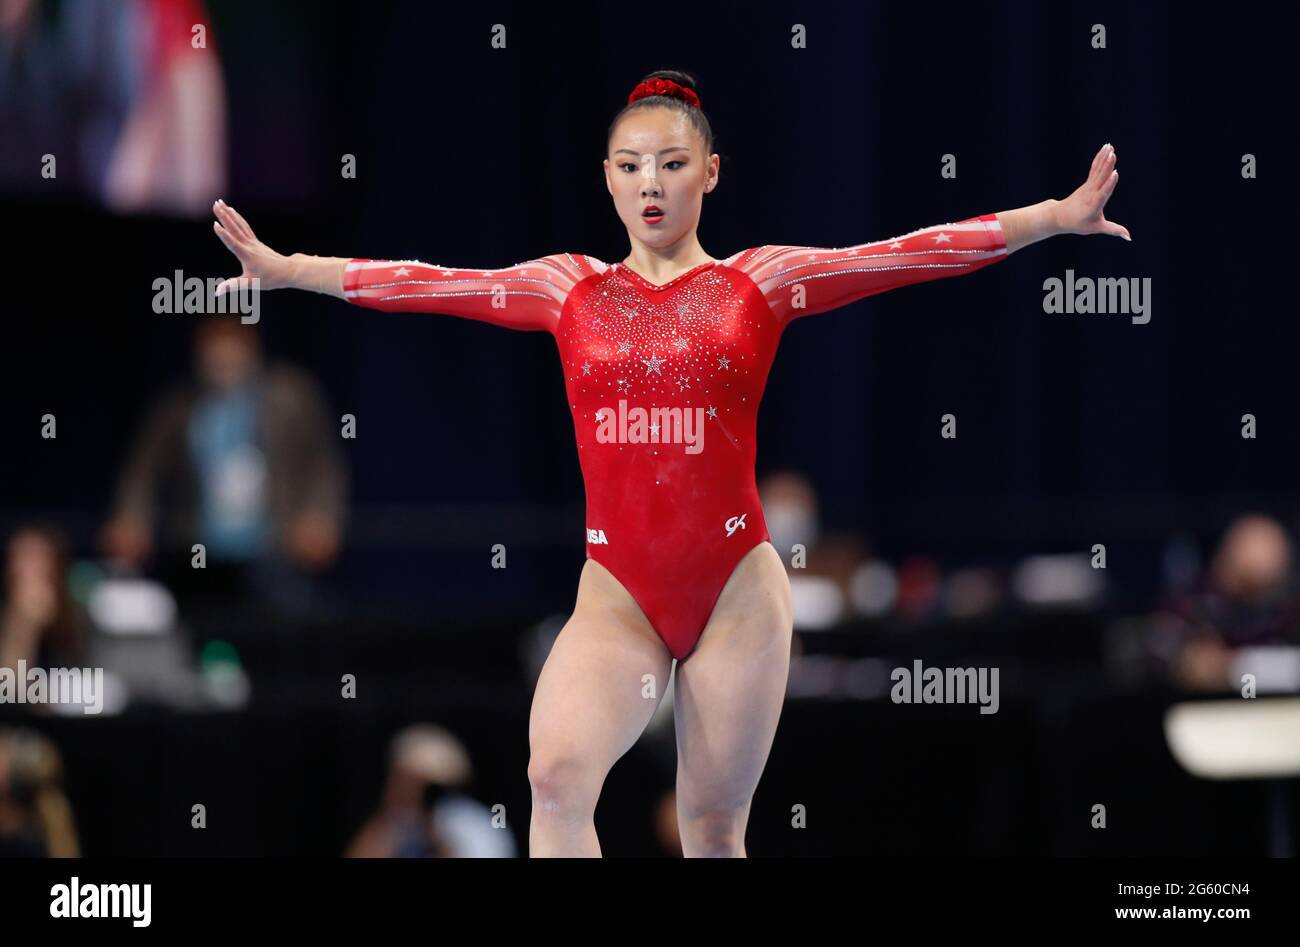 June 25 2021 Kara Eaker Performs Her Floor Routine During Day 1 Of The 2021 Us Womens 